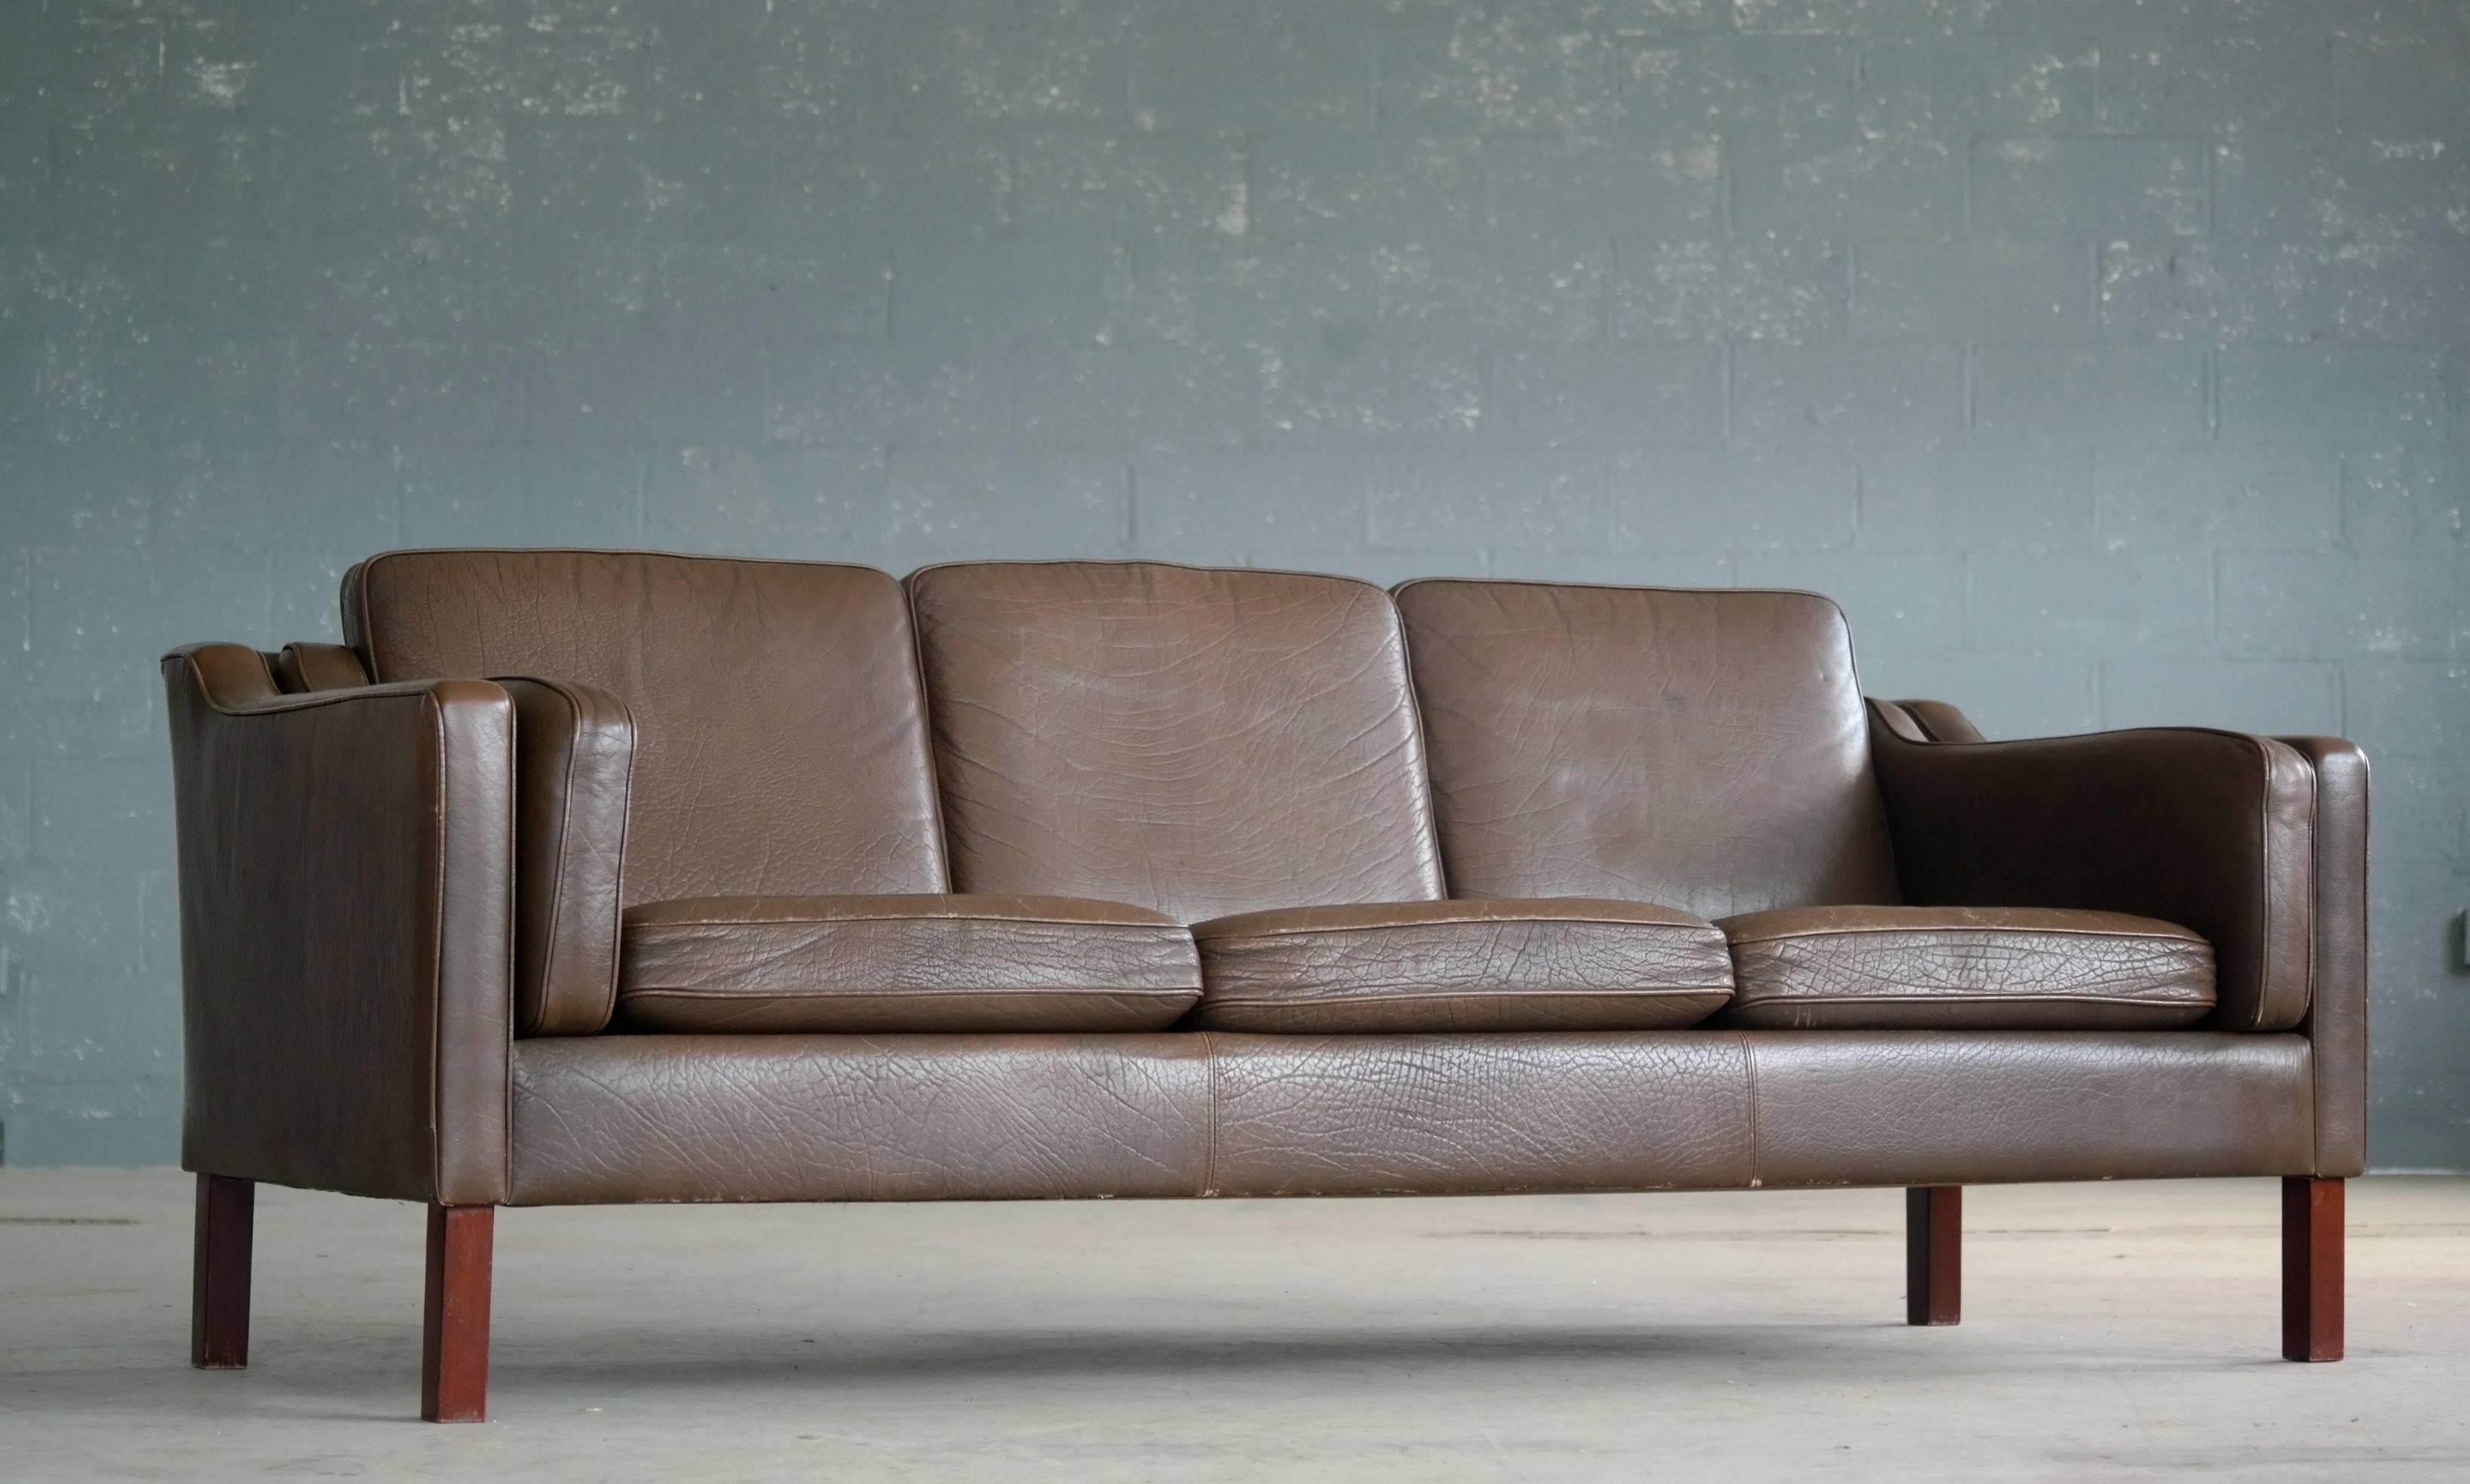 Børge Mogensen style sofa in chocolate brown leather by Mogens Hansen, designed in the late 1960s and likely produced sometime in the 1970s. Very good condition with natural age appropriate wear and patina.
 